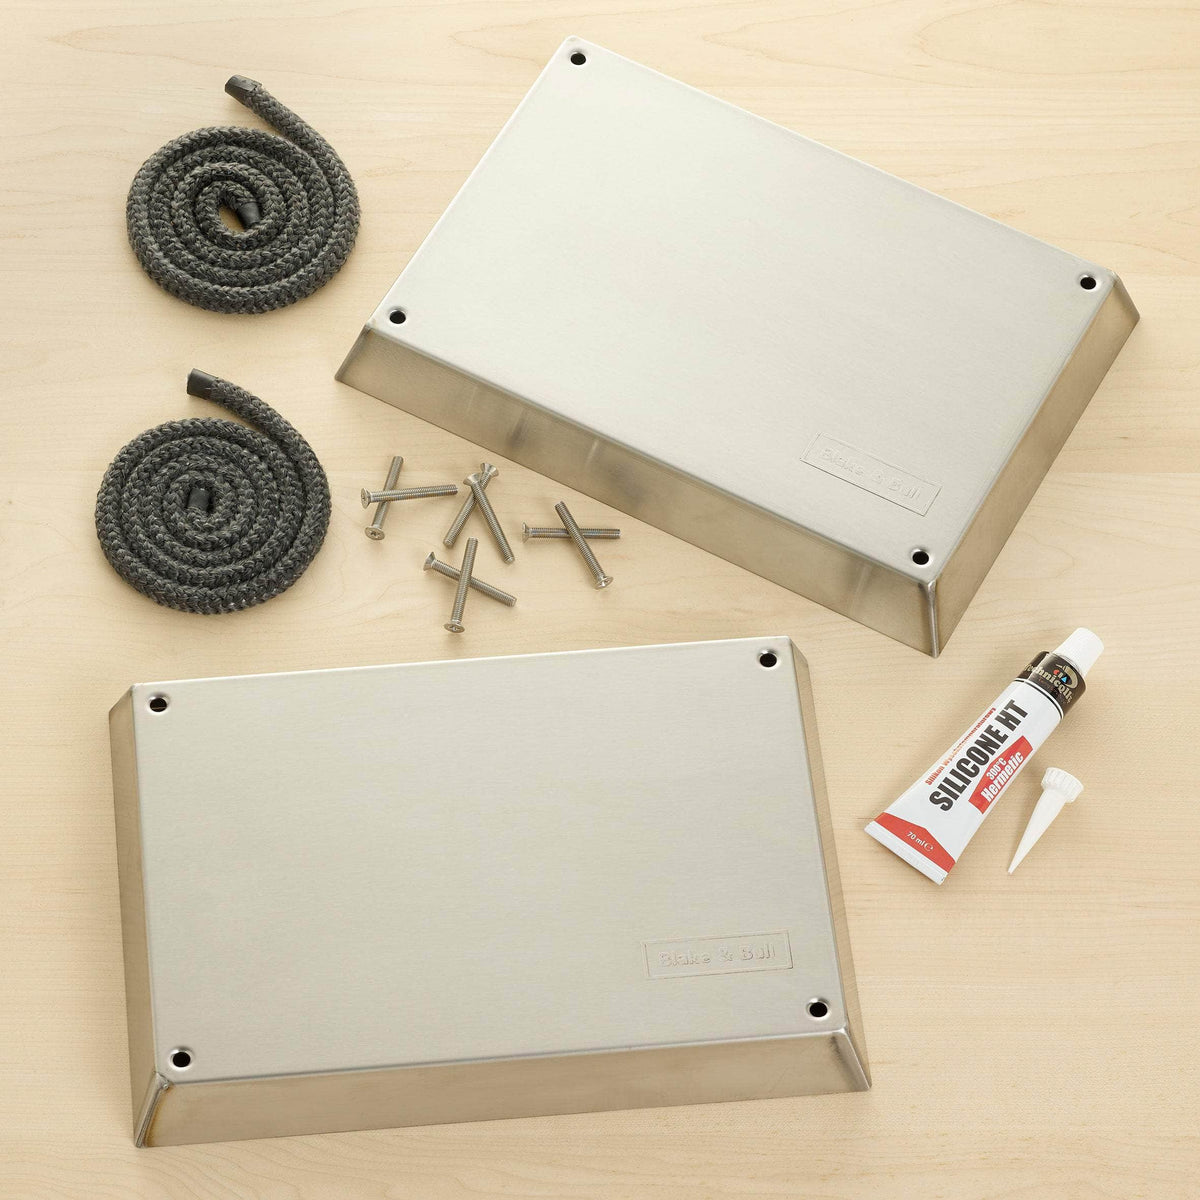 *NEW* Stainless Steel Door liners replacement kit for use with Aga range cookers